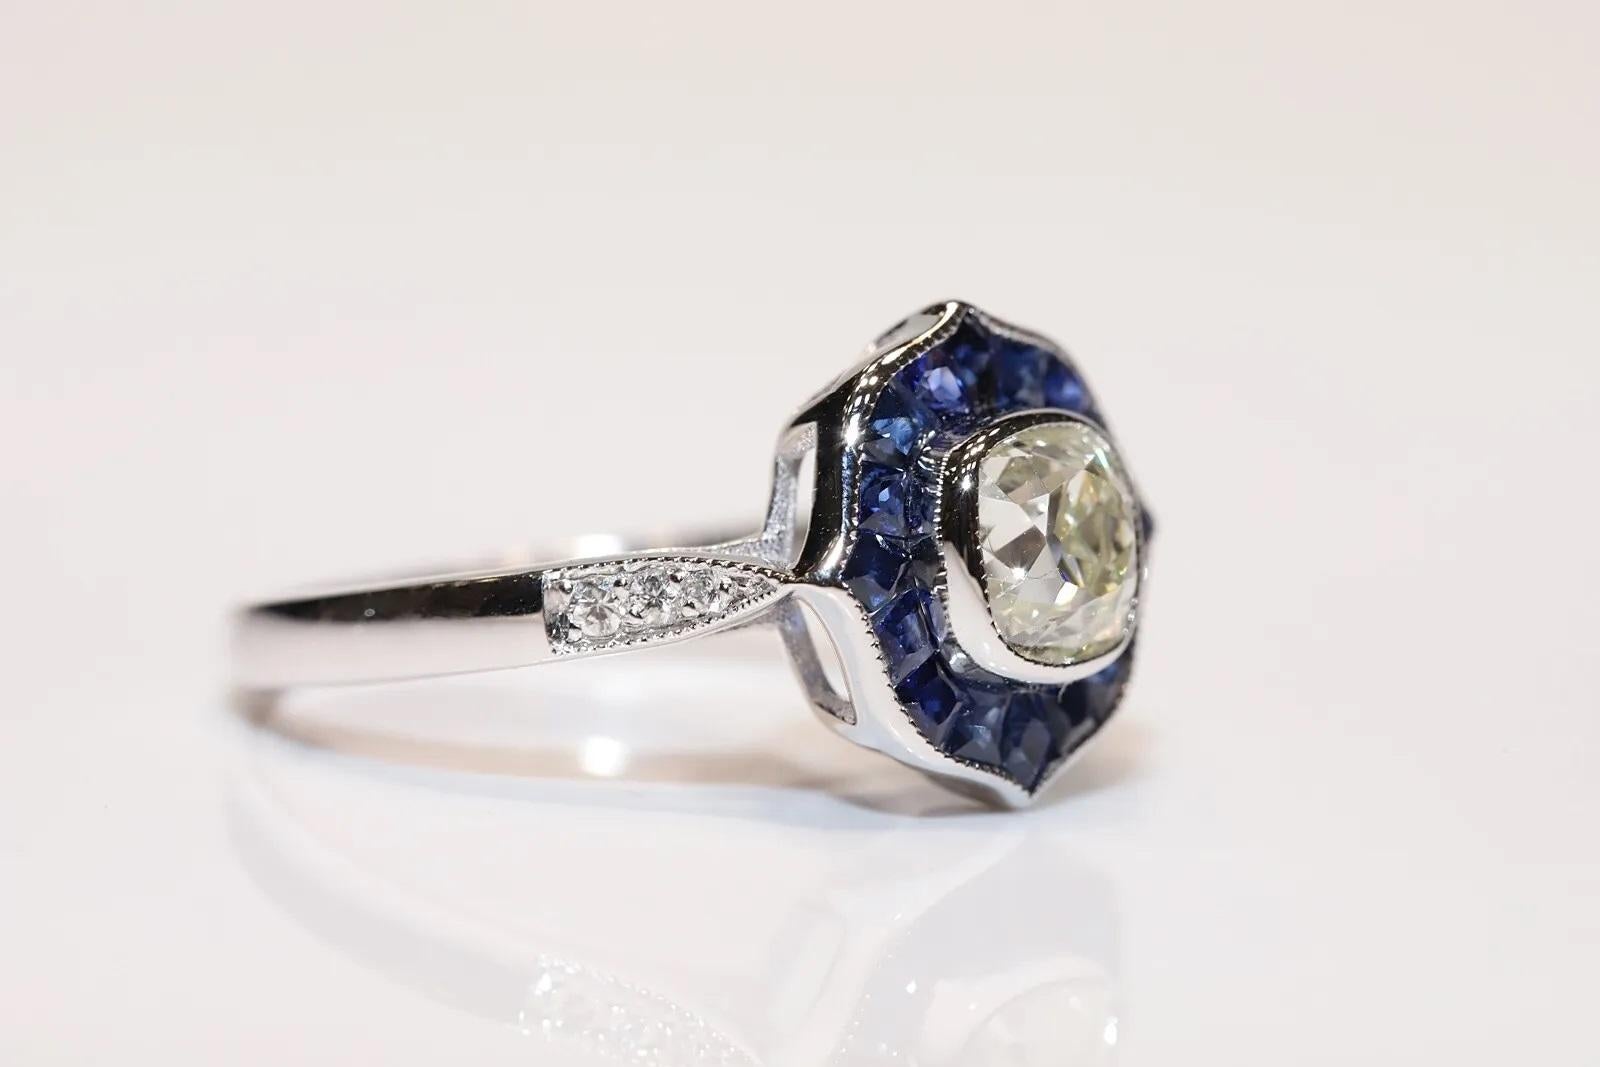 In very good condition.
Total weight is 4.1 grams.
Totally is Diamond 0.99 carat.
The diamond is has H-I color and vvs clarity.
Totally is caliber sapphire 1.05 carat.
Totally is side  diamond 0.06 carat.
Ring size is US 6.5 (We offer free